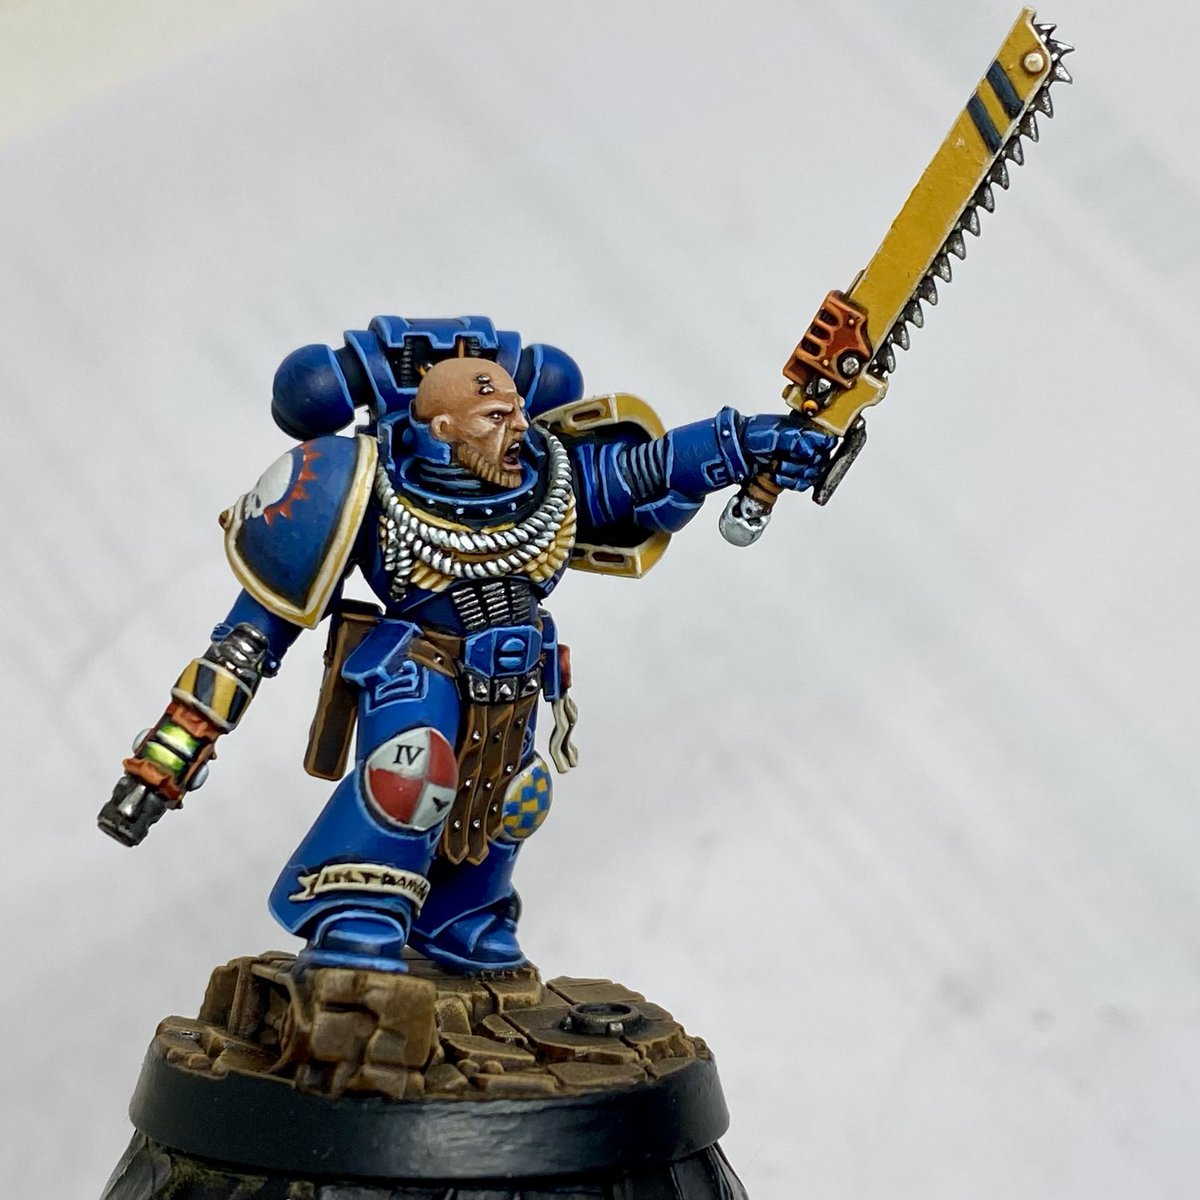 Rounding out #MarchForMacragge with one from the vaults - Sgt. Sevastus from the 1st series of Space Marine Heroes. One of the first blue bois I ever painted, a couple of months into the pandemic… #WarhammerCommunity #Ultramarines #Warhammer40k #PaintingWarhammer